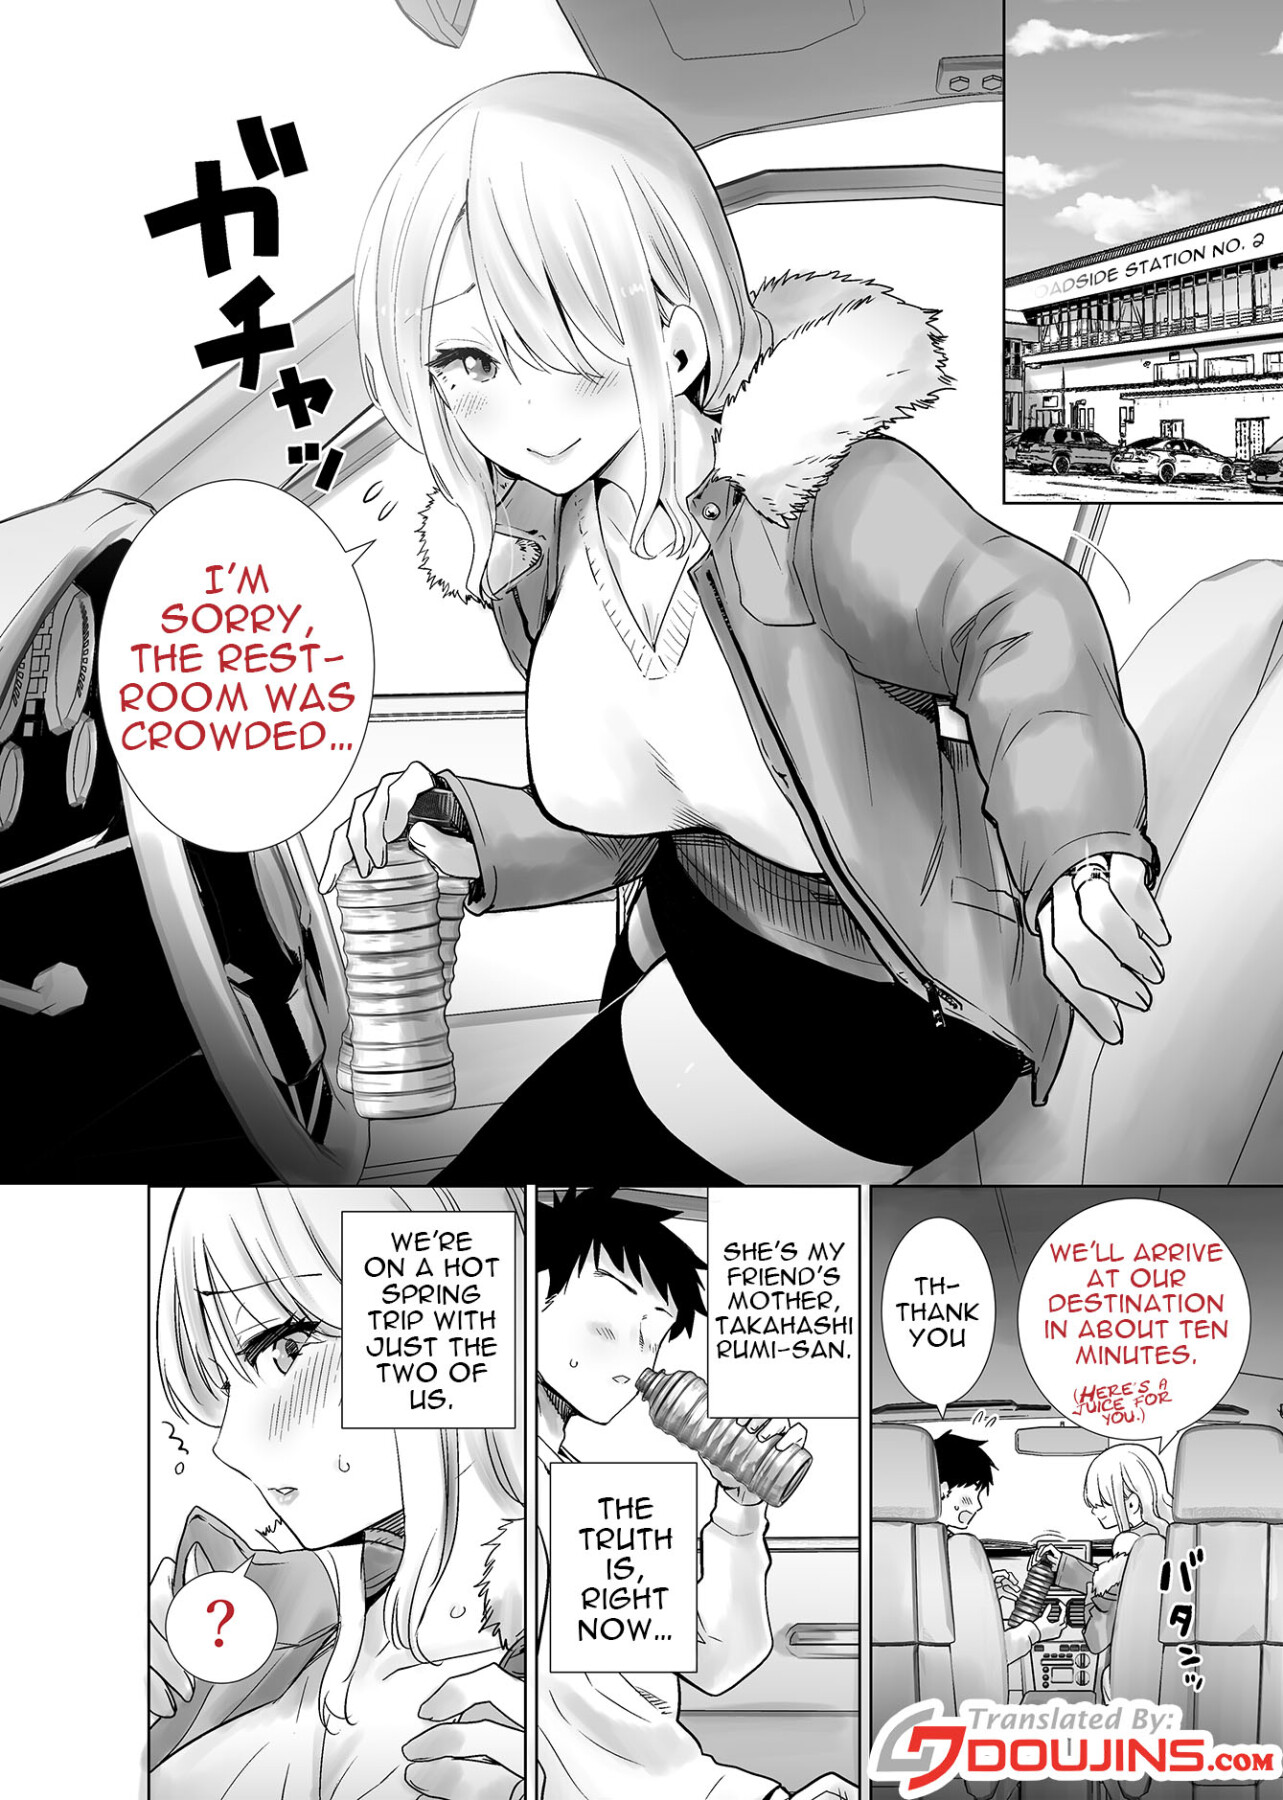 Hentai Manga Comic-The Hotspring Trip Where My Mother's Friend Was All Over My Big Dick-Read-2